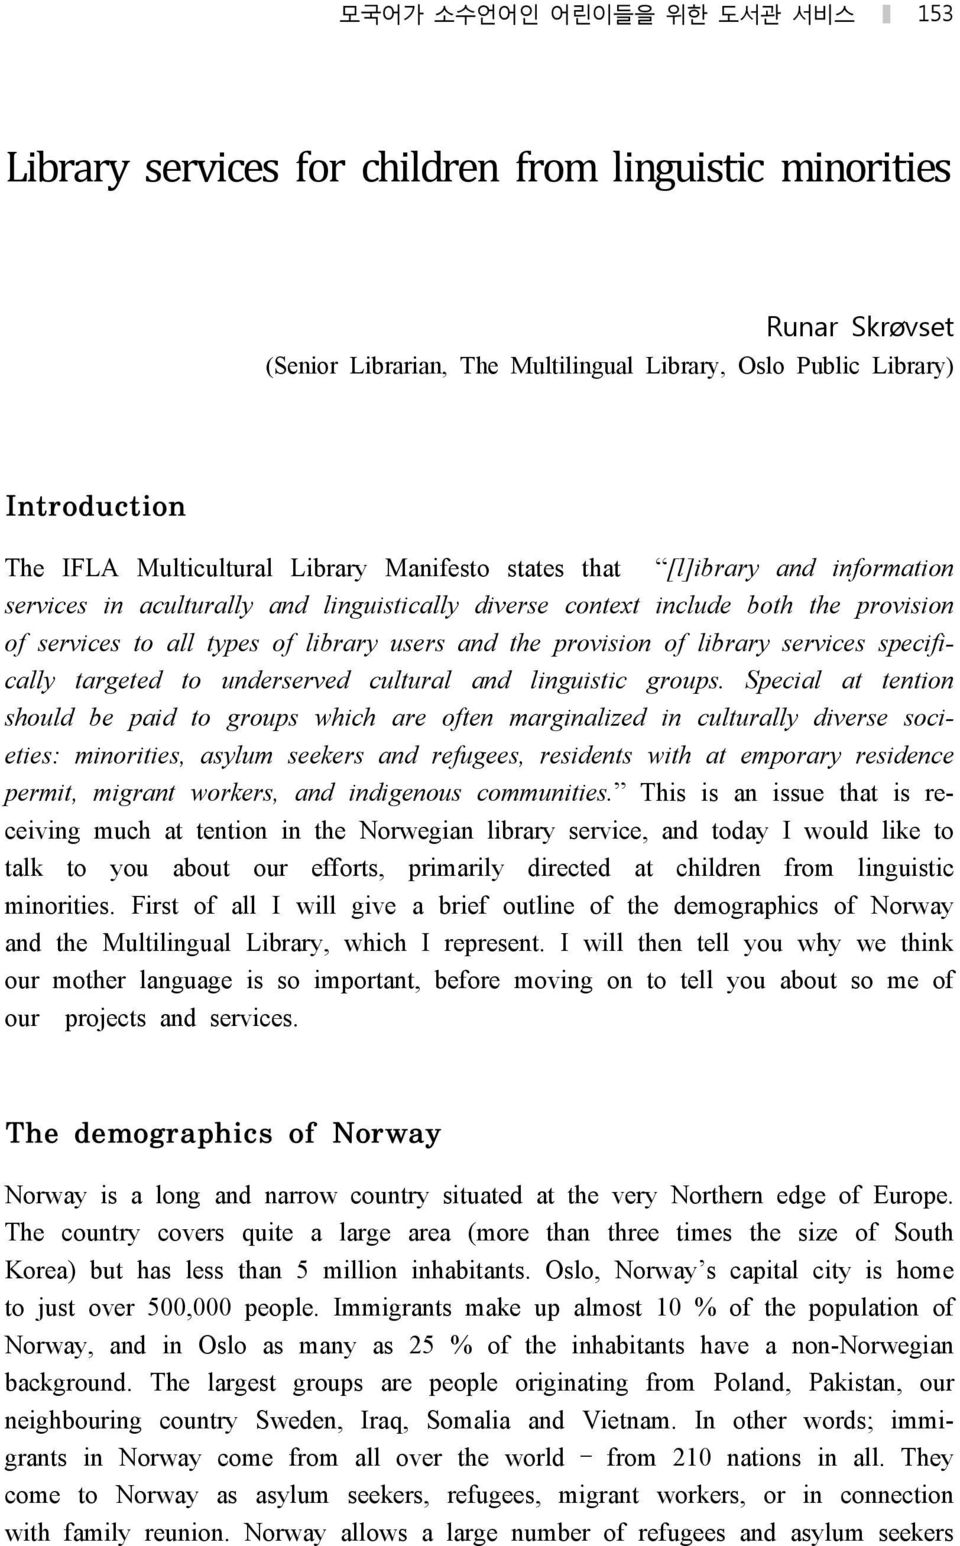 and the provision of library services specifically targeted to underserved cultural and linguistic groups.